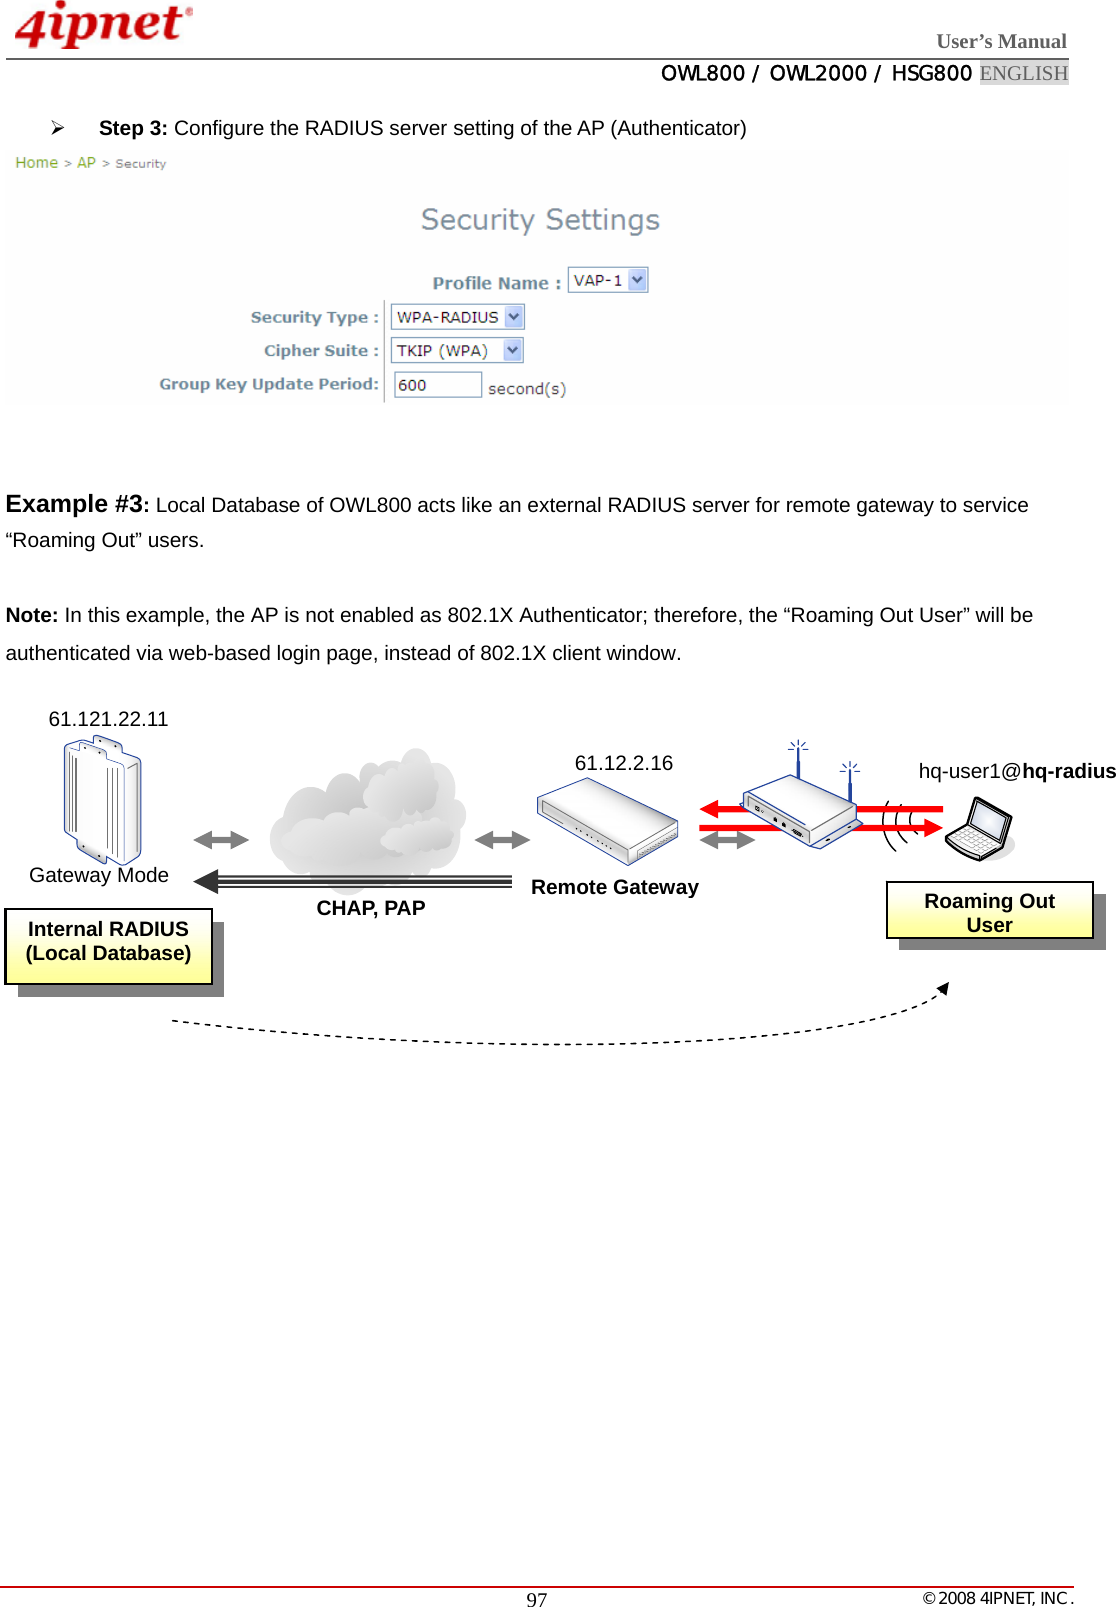  User’s Manual  OWL800 / OWL2000 / HSG800 ENGLISH   © 2008 4IPNET, INC.  97¾ Step 3: Configure the RADIUS server setting of the AP (Authenticator)    Example #3: Local Database of OWL800 acts like an external RADIUS server for remote gateway to service “Roaming Out” users.   Note: In this example, the AP is not enabled as 802.1X Authenticator; therefore, the “Roaming Out User” will be authenticated via web-based login page, instead of 802.1X client window.              Internal RADIUS (Local Database) Remote Gateway61.12.2.16CHAP, PAP hq-user1@hq-radiusRoaming Out User Gateway Mode 61.121.22.11 